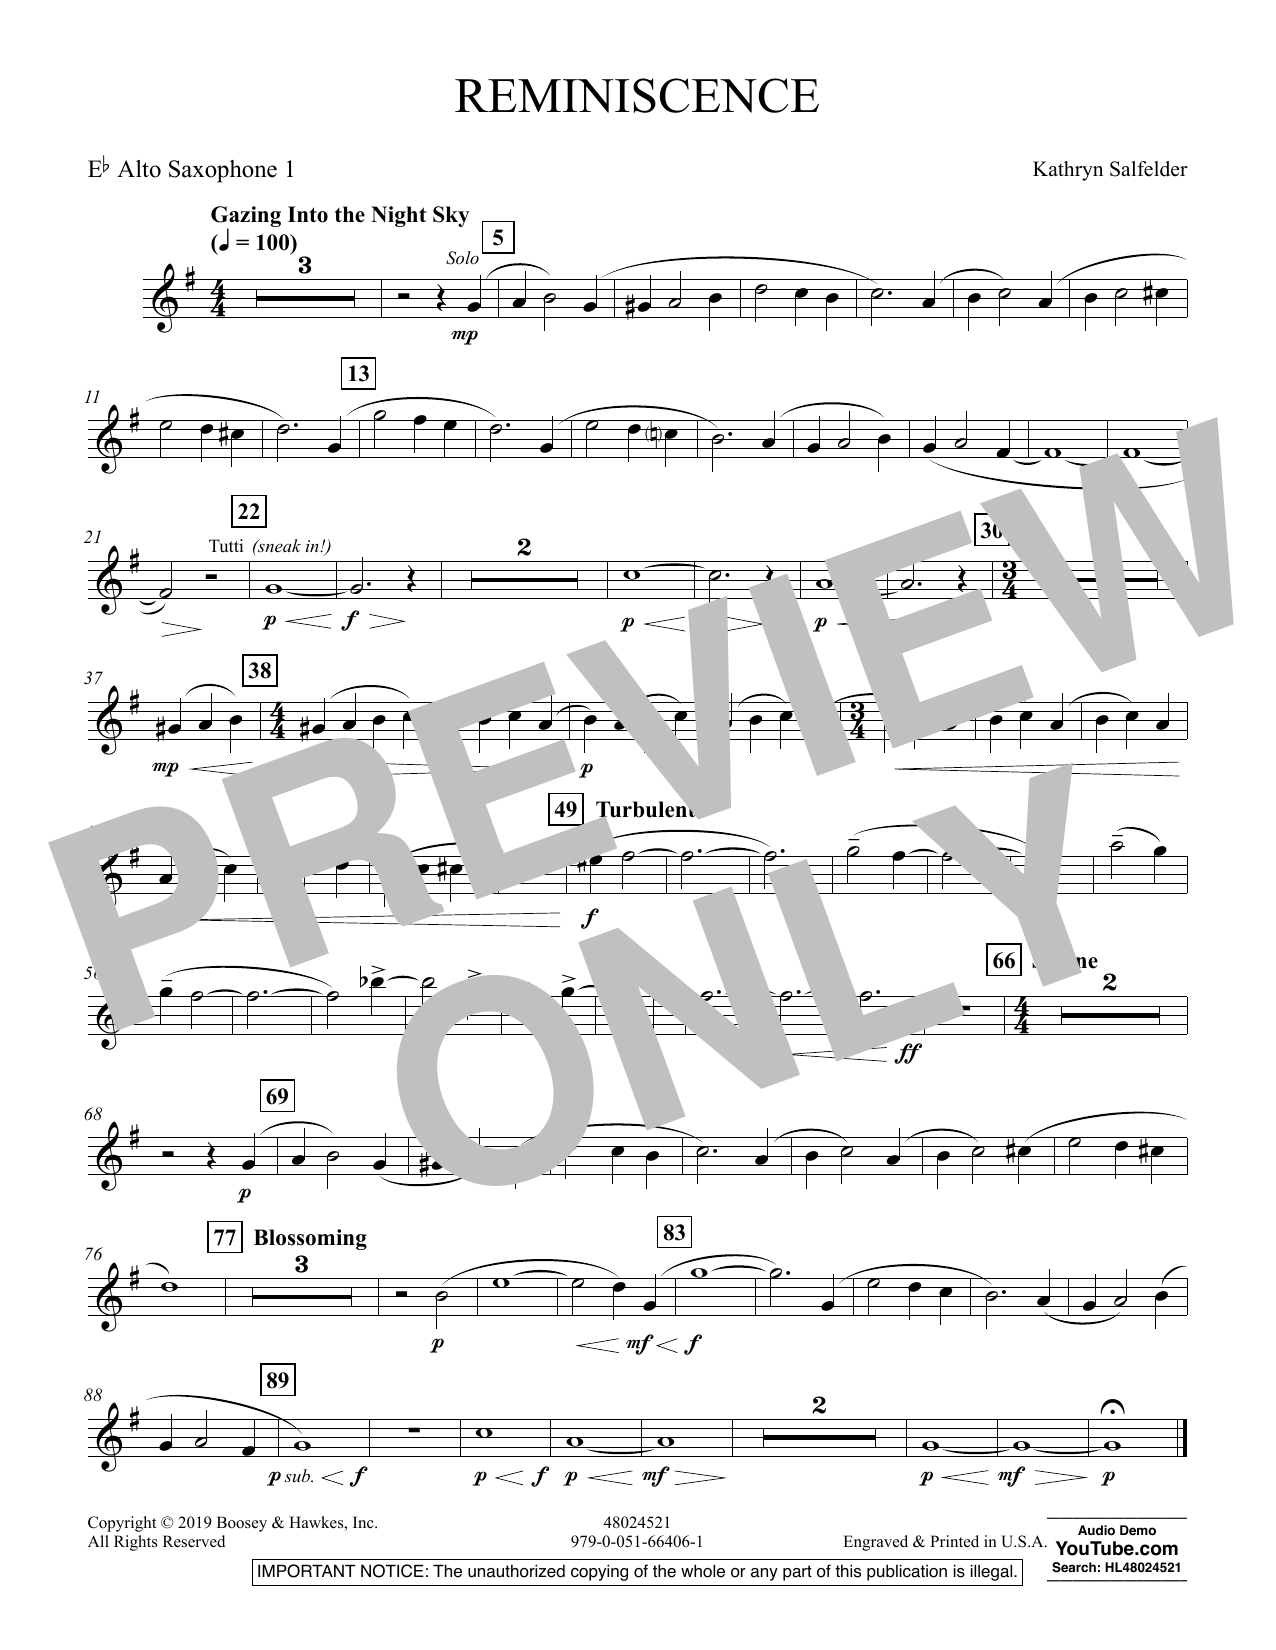 Kathryn Salfelder Reminiscence - Eb Alto Saxophone 1 sheet music preview music notes and score for Concert Band including 1 page(s)